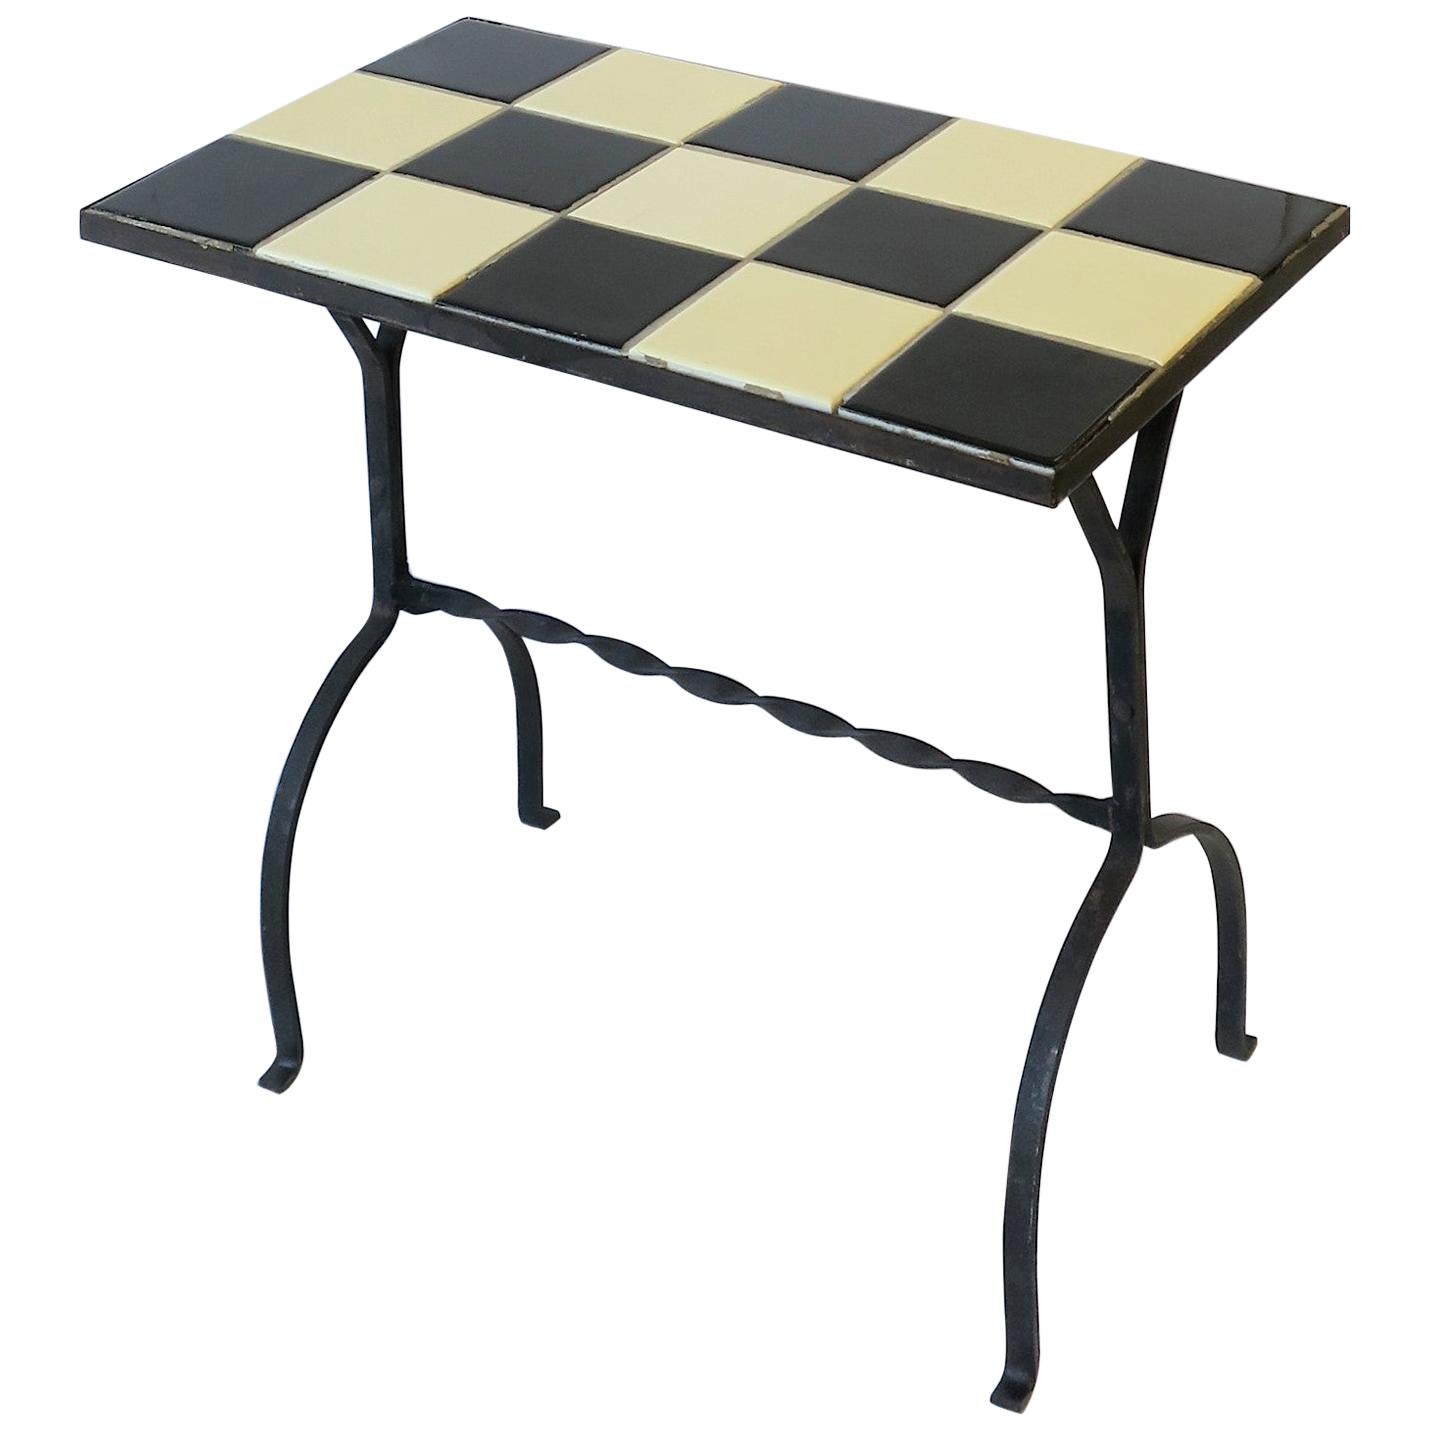 Mid-Century Modern Black and White Mosaic Tile Side or End Table